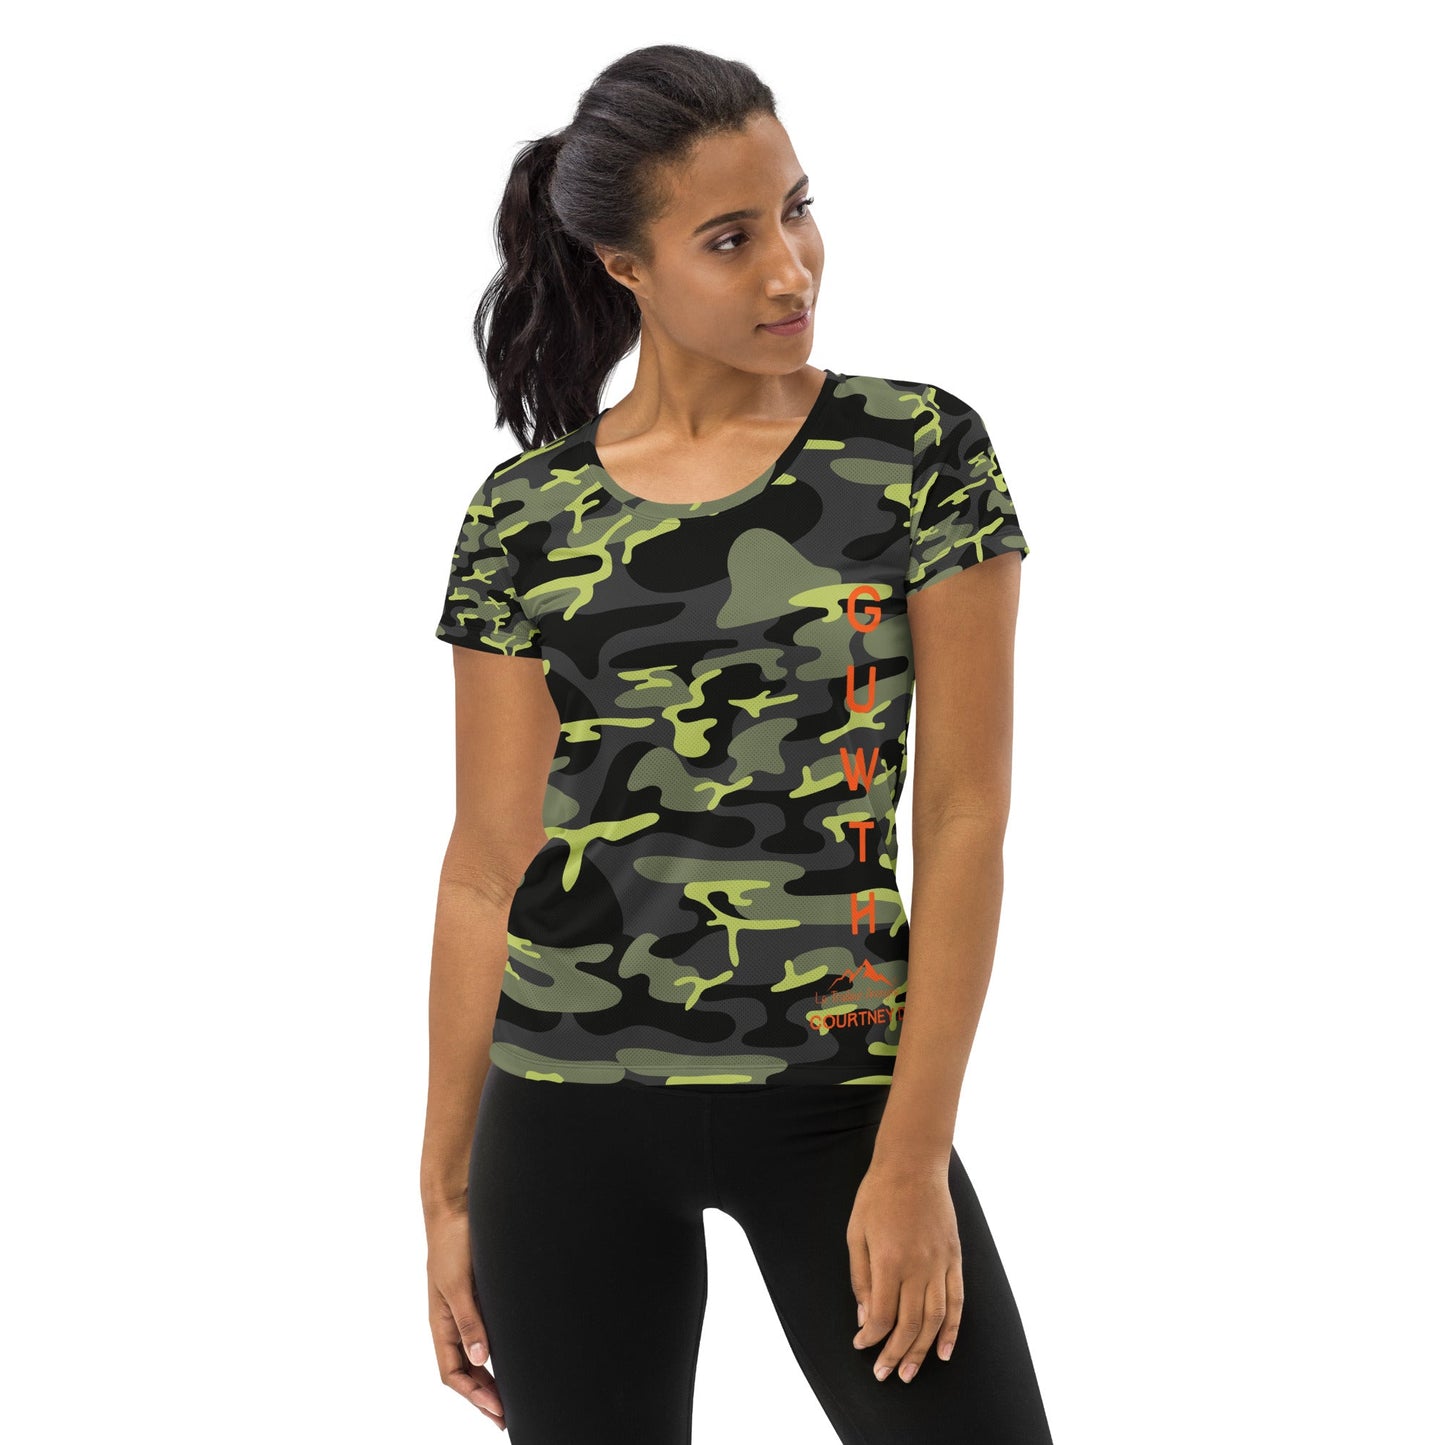 T-Shirt Sport - Femme - Collection Hommage Army - Courtney D. - Le Traileur Anonyme